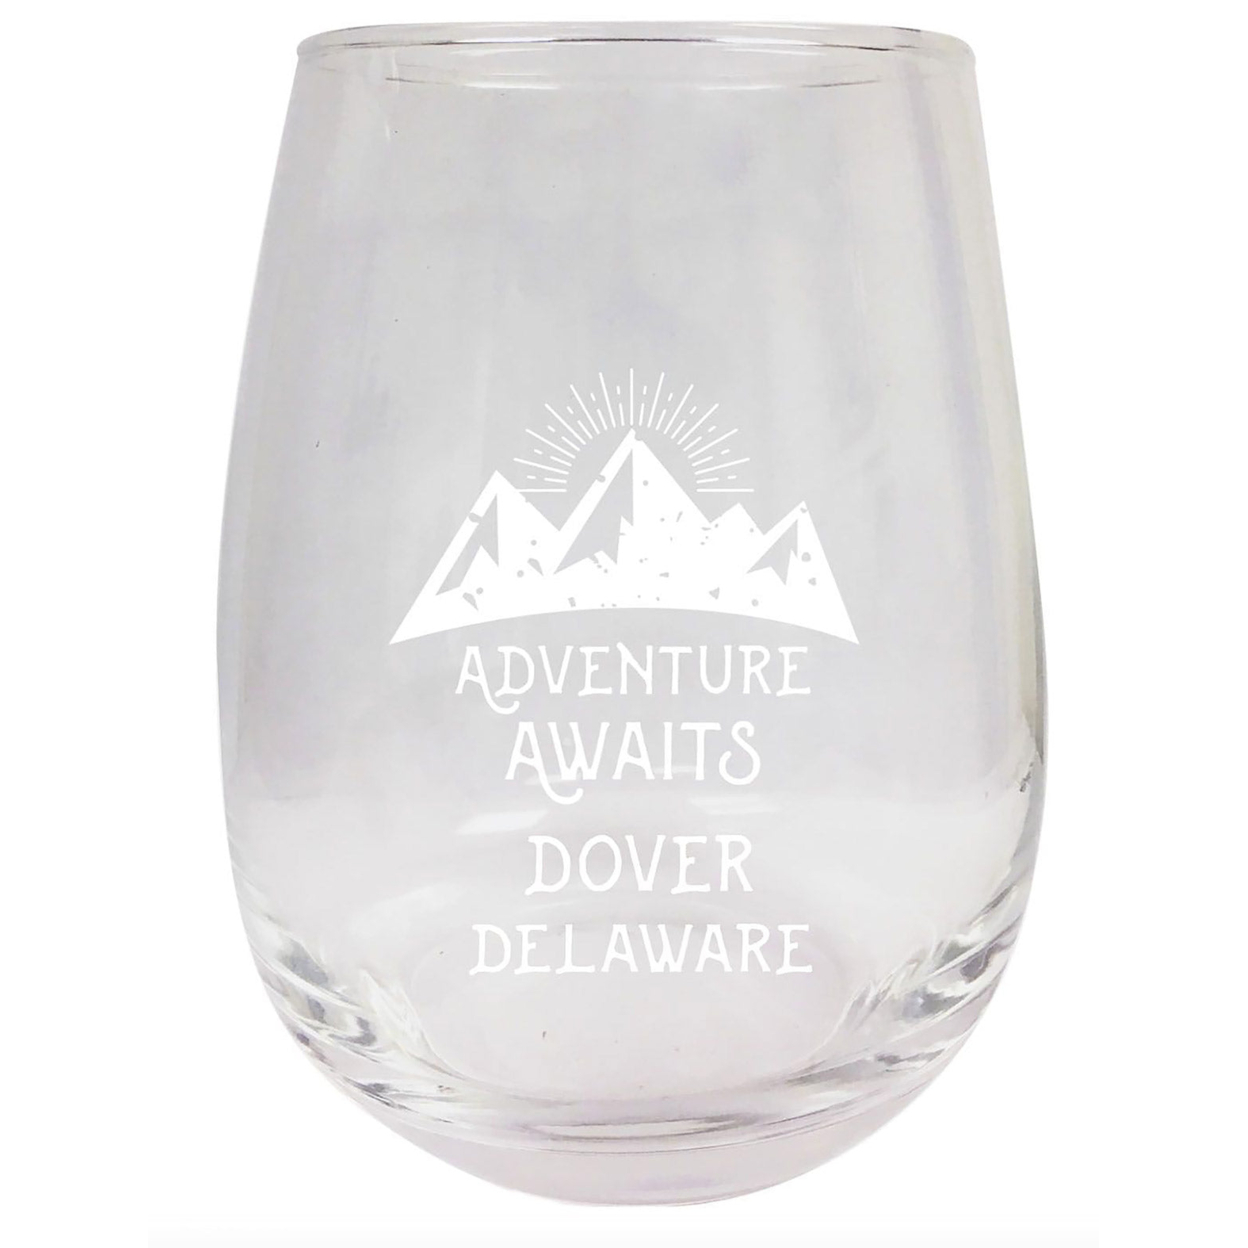 Delaware Engraved Stemless Wine Glass Duo